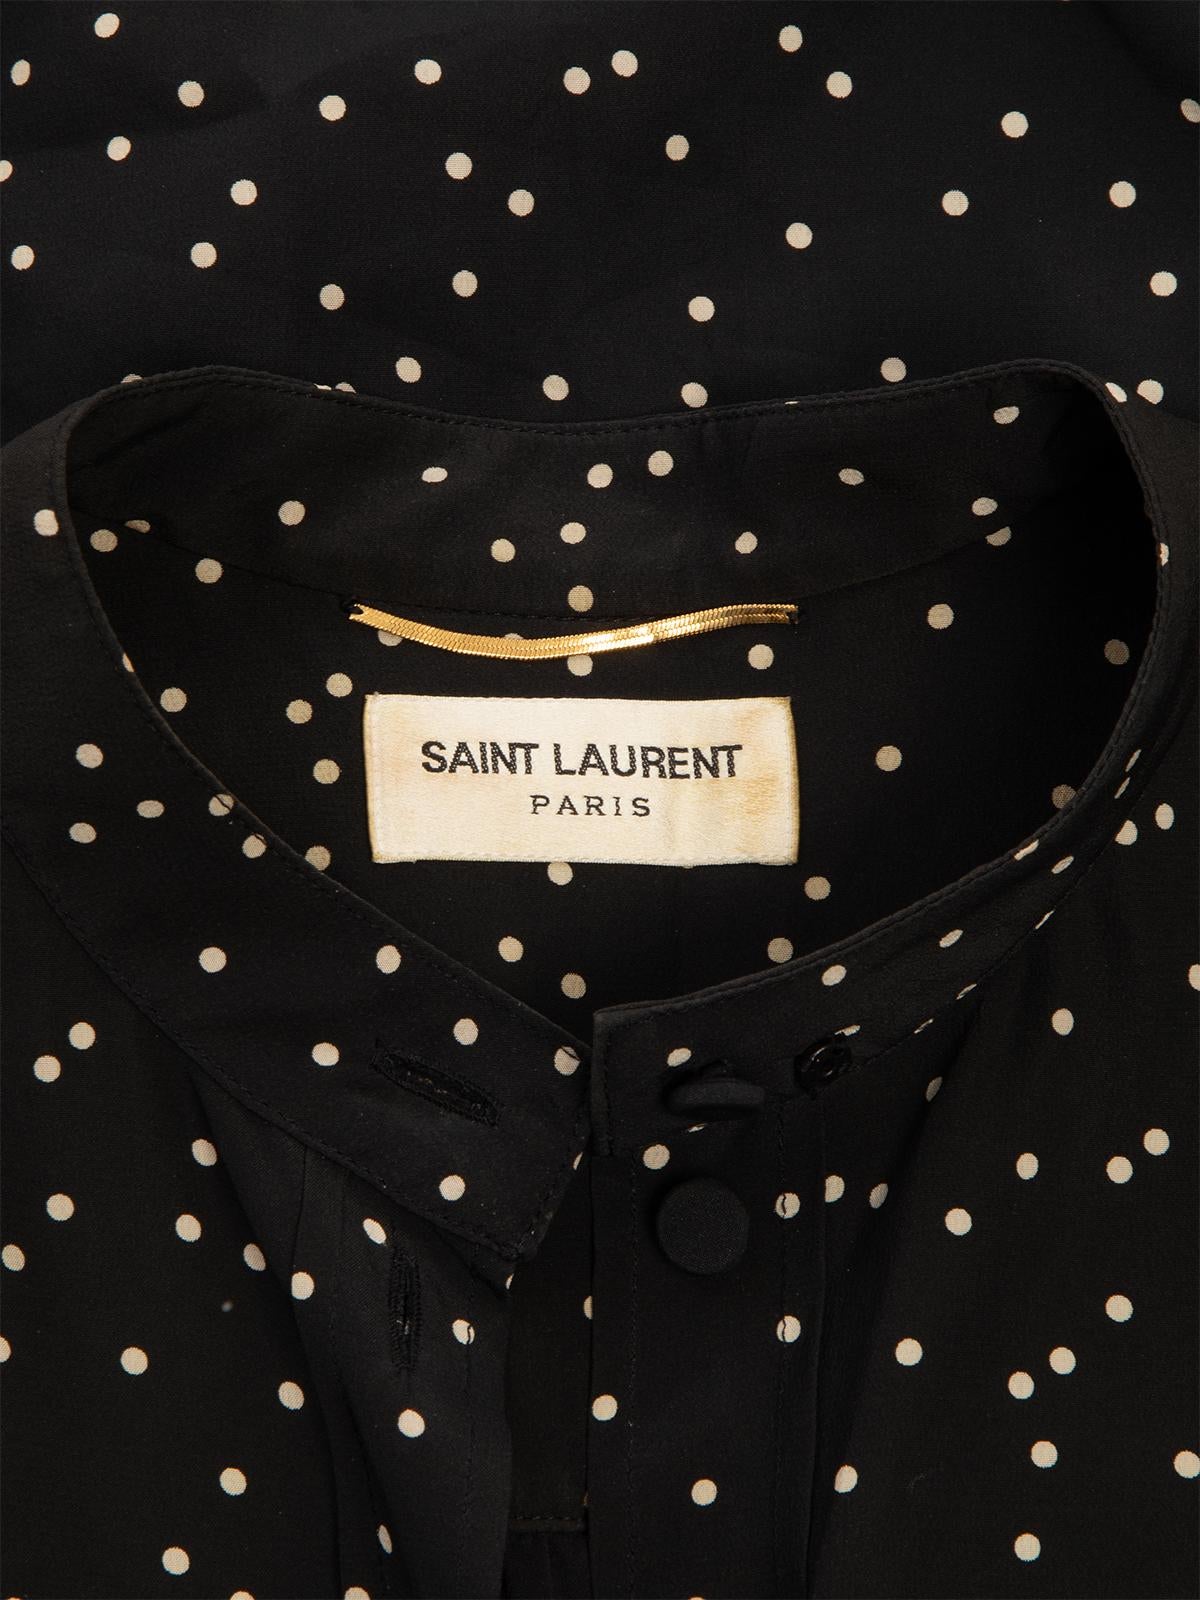 CONDITION is Very good. Minimal wear and pilling to fabric is evident. One stain evidenton this used Saint Laurent designer resale item.  Details  Black Silk Shirt dress with polka dots Loose fit  Long sleeves High collar and buttoned down front 